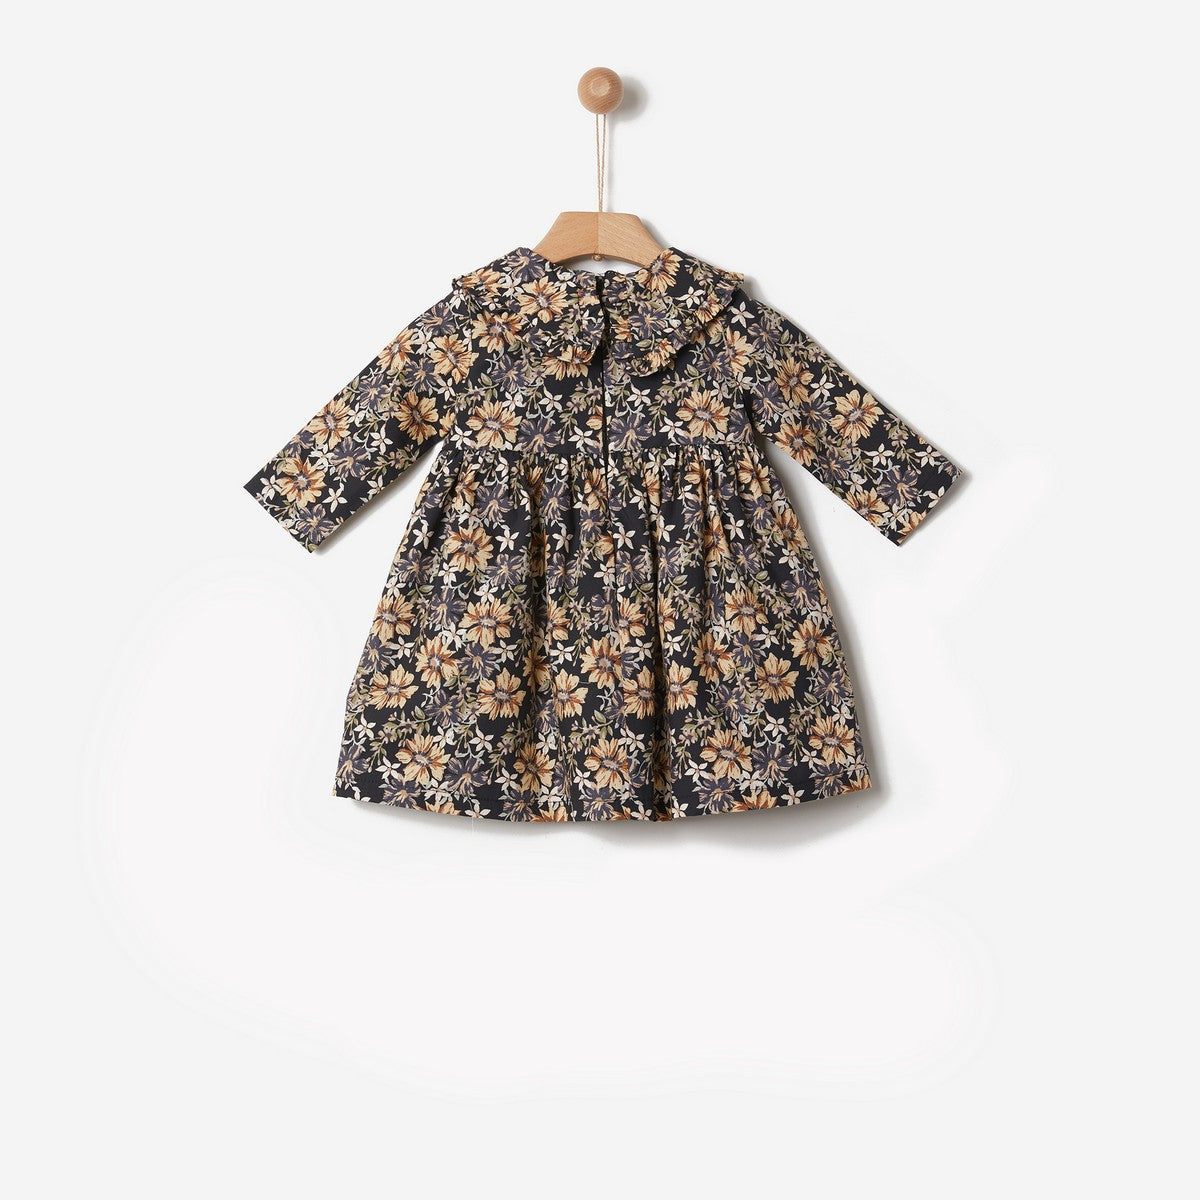 Yell-Oh Black Collar Floral Dress